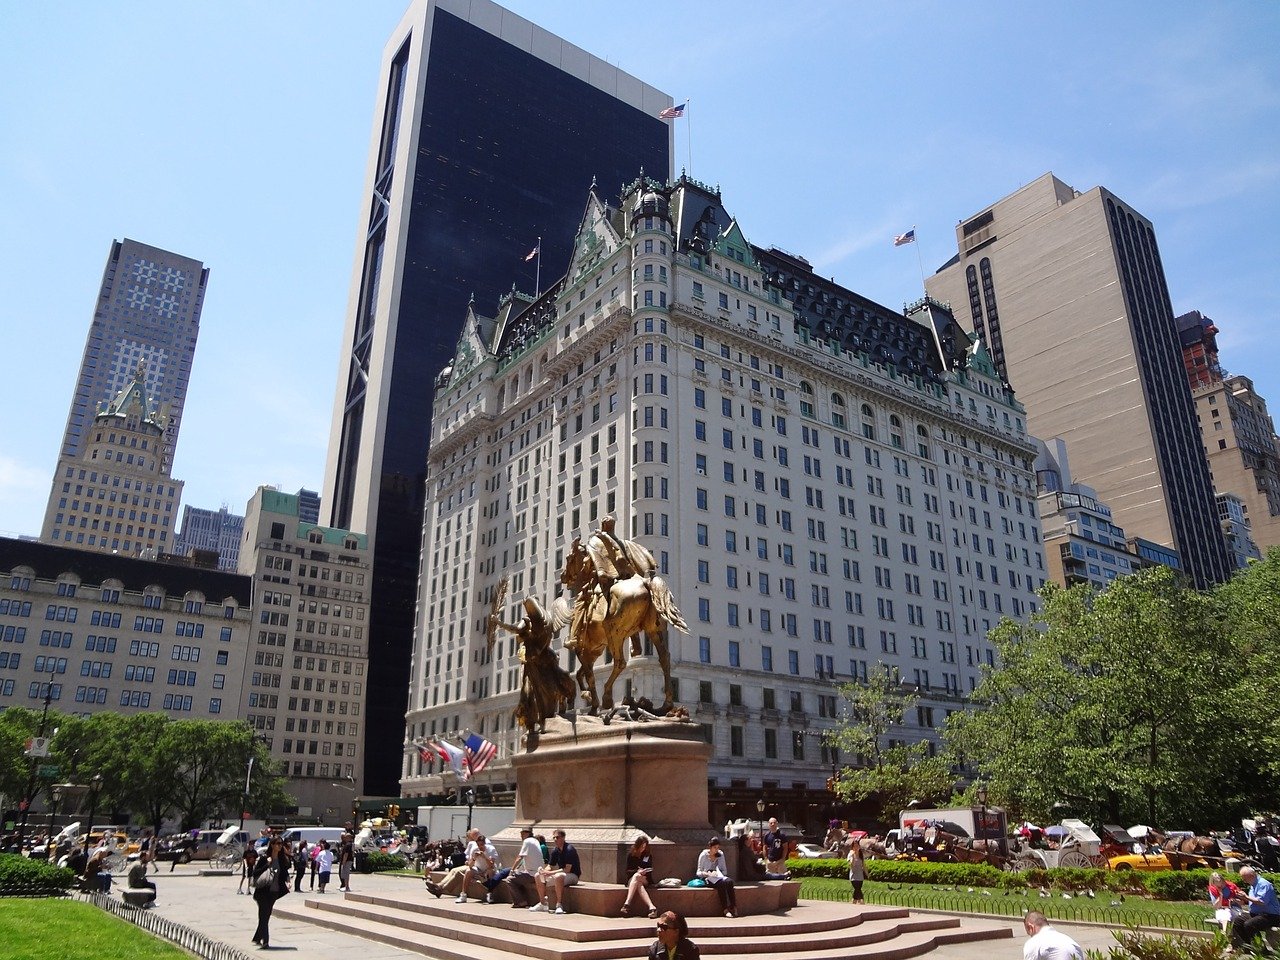 The Gulf state of Qatar has entered a deal to acquire New Yorks Plaza Hotel for approximately 600 million through the state